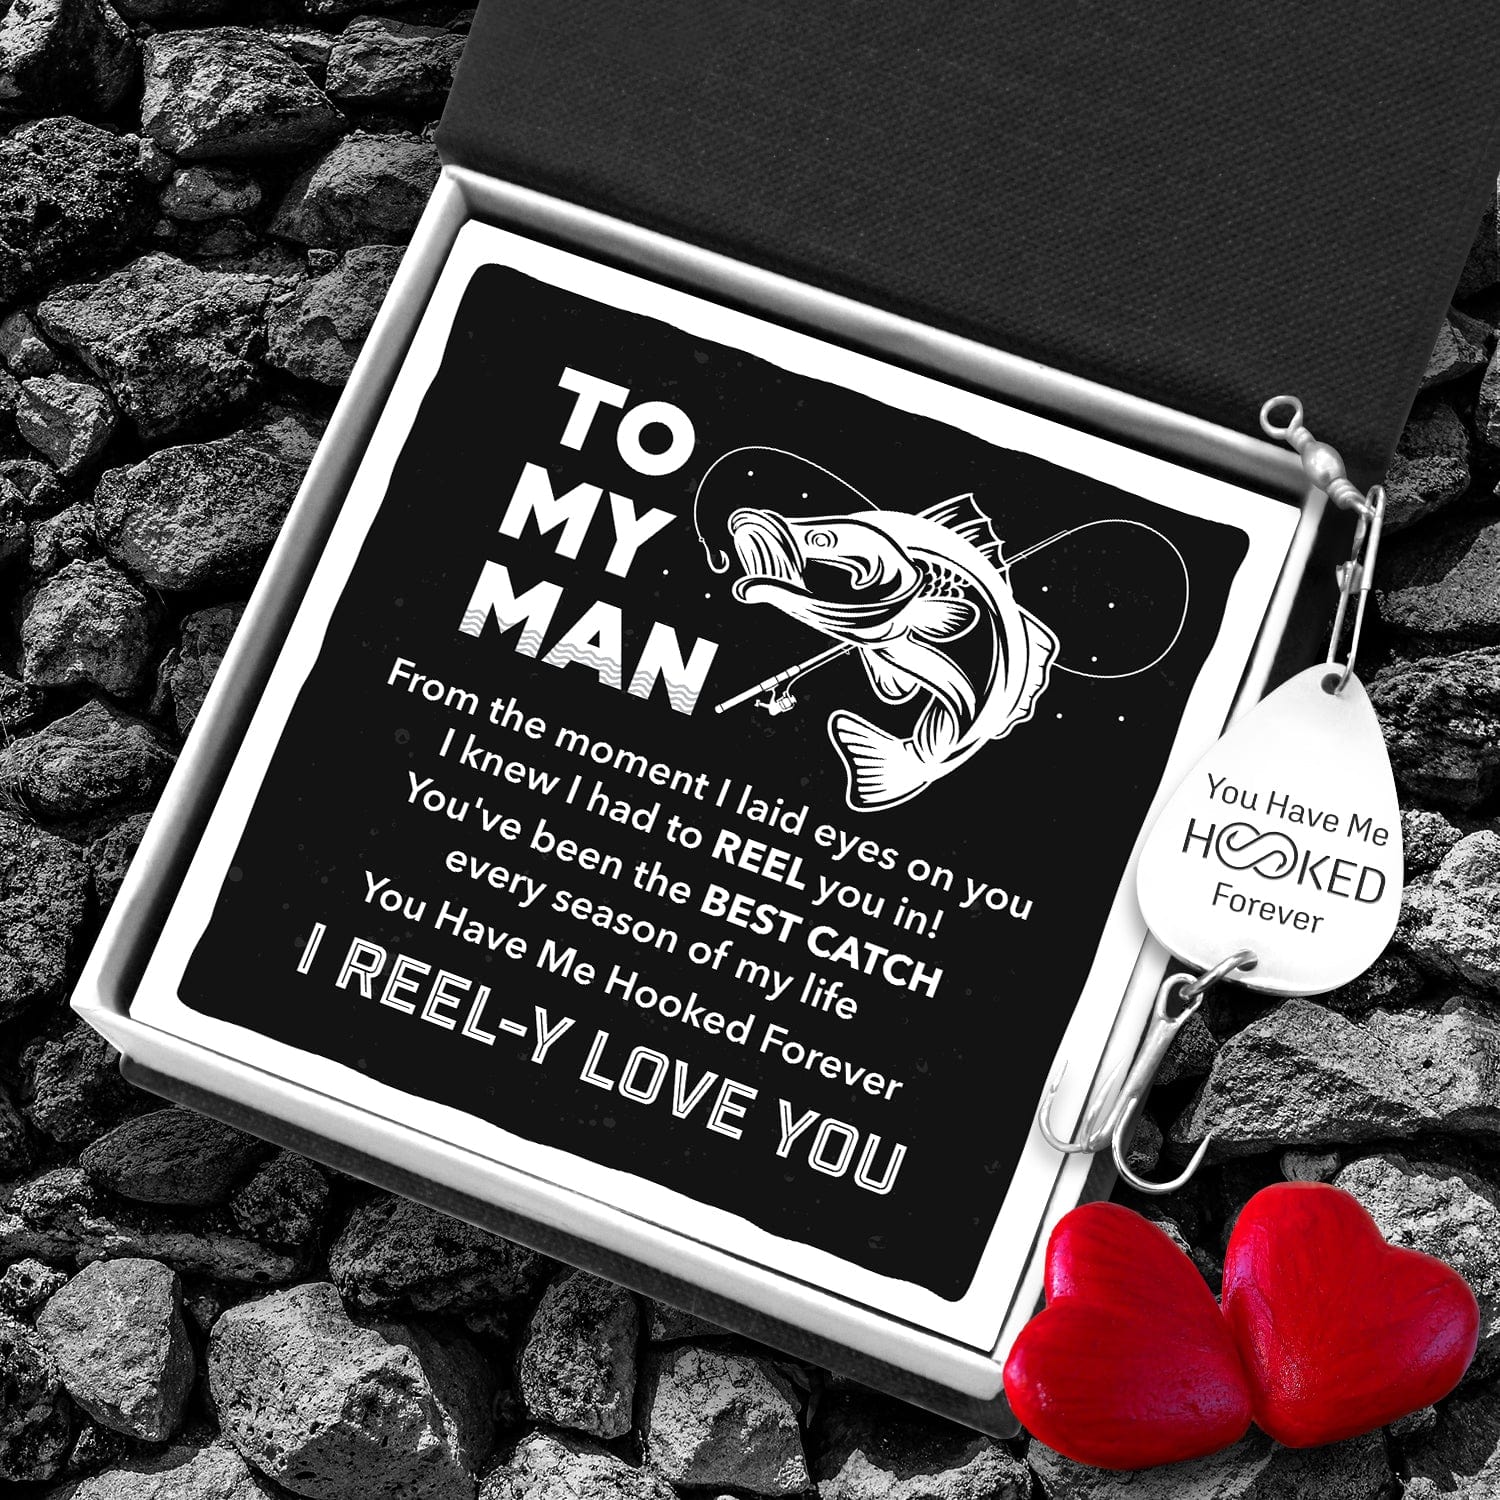 Engraved Fishing Hook - Fishing - To My Man - You've Been The Best Catch Every Season Of My Life - Gfa26018